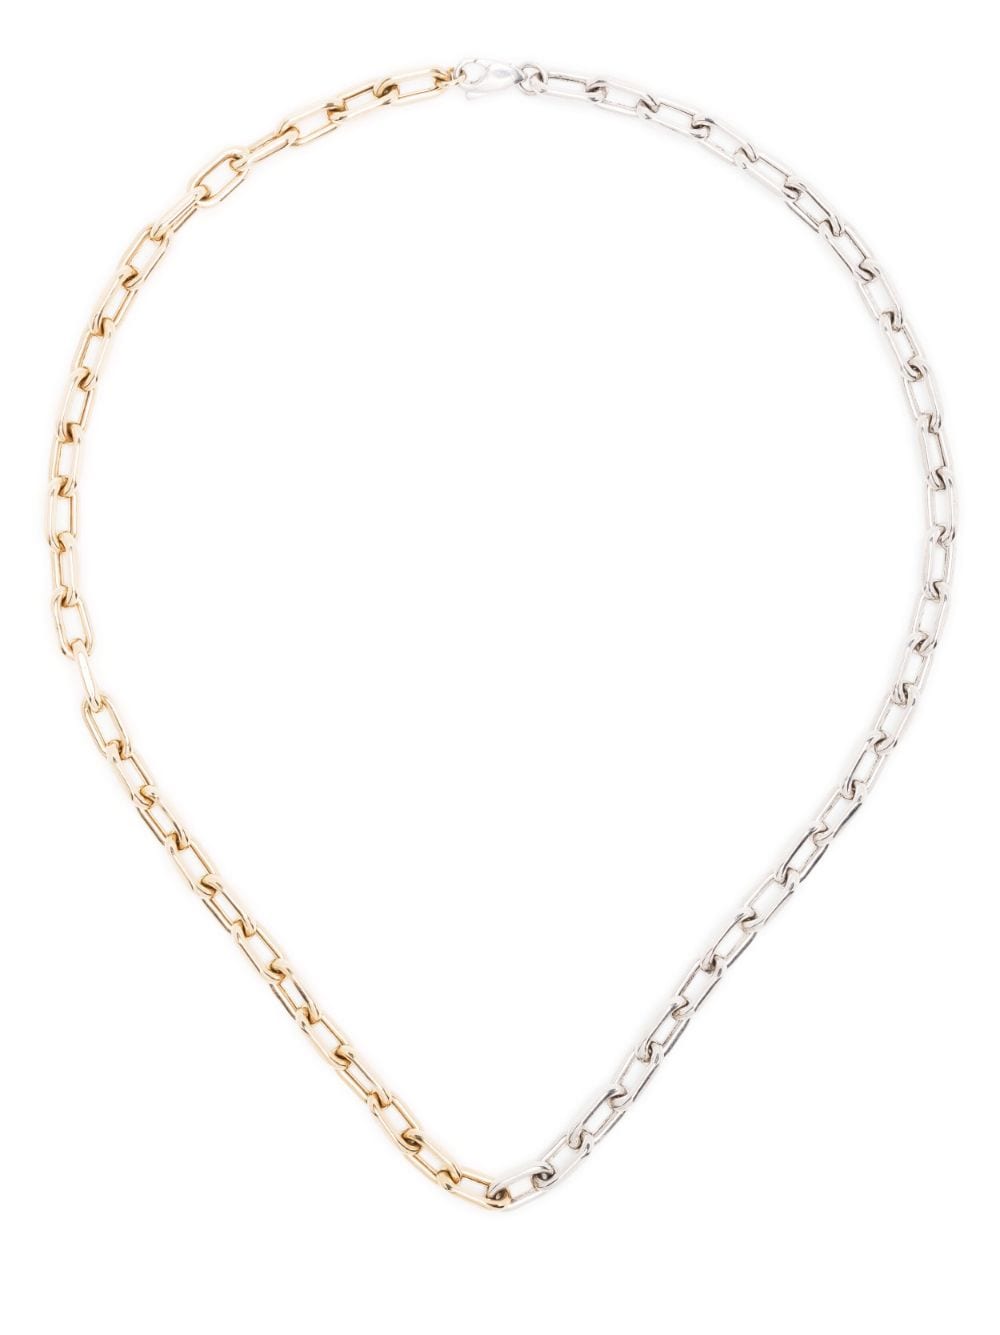 Adina Reyter 14kt yellow gold and sterling silver Italian chain necklace von Adina Reyter